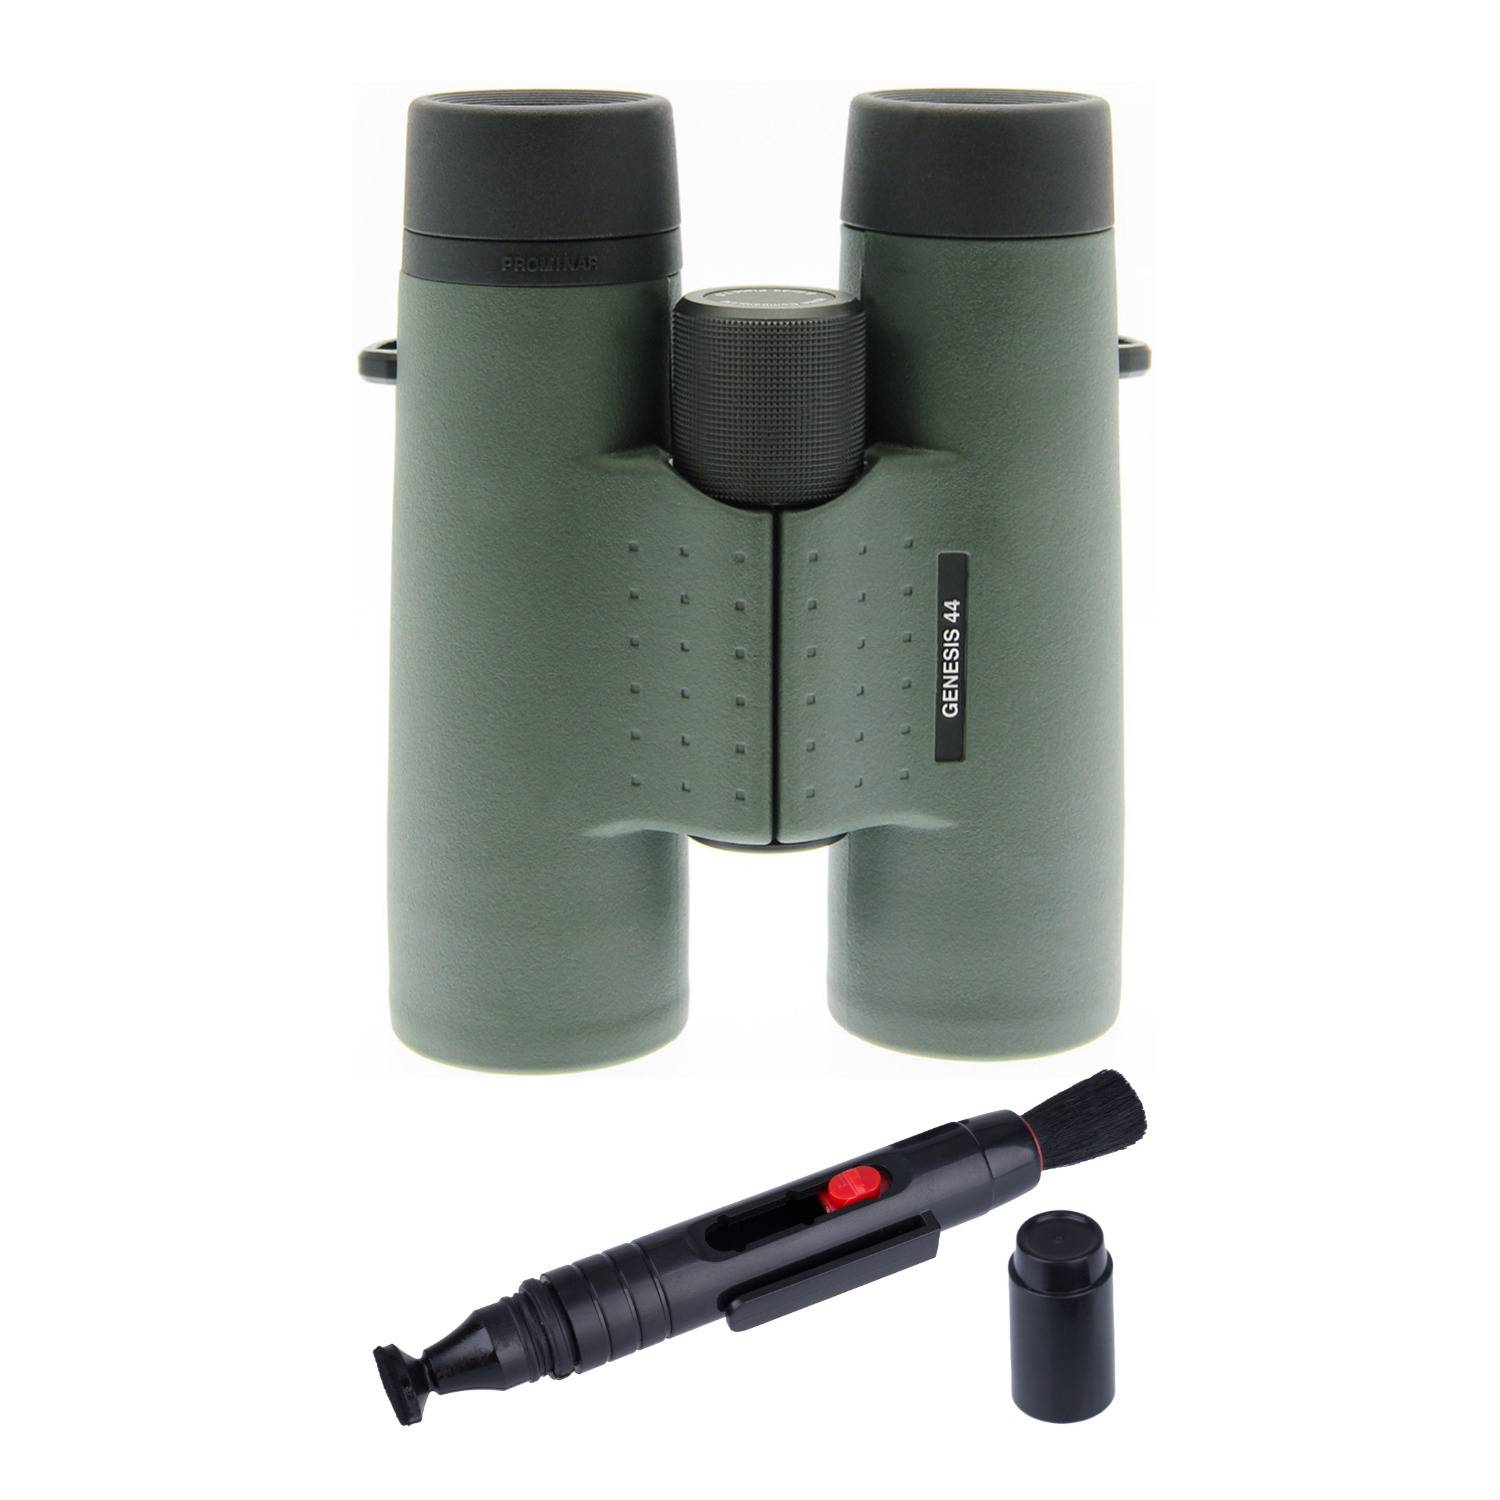 Kowa 8.5x44 Prominar XD lens 44mm Roof Prism Binoculars with Lens Cleaning Pen